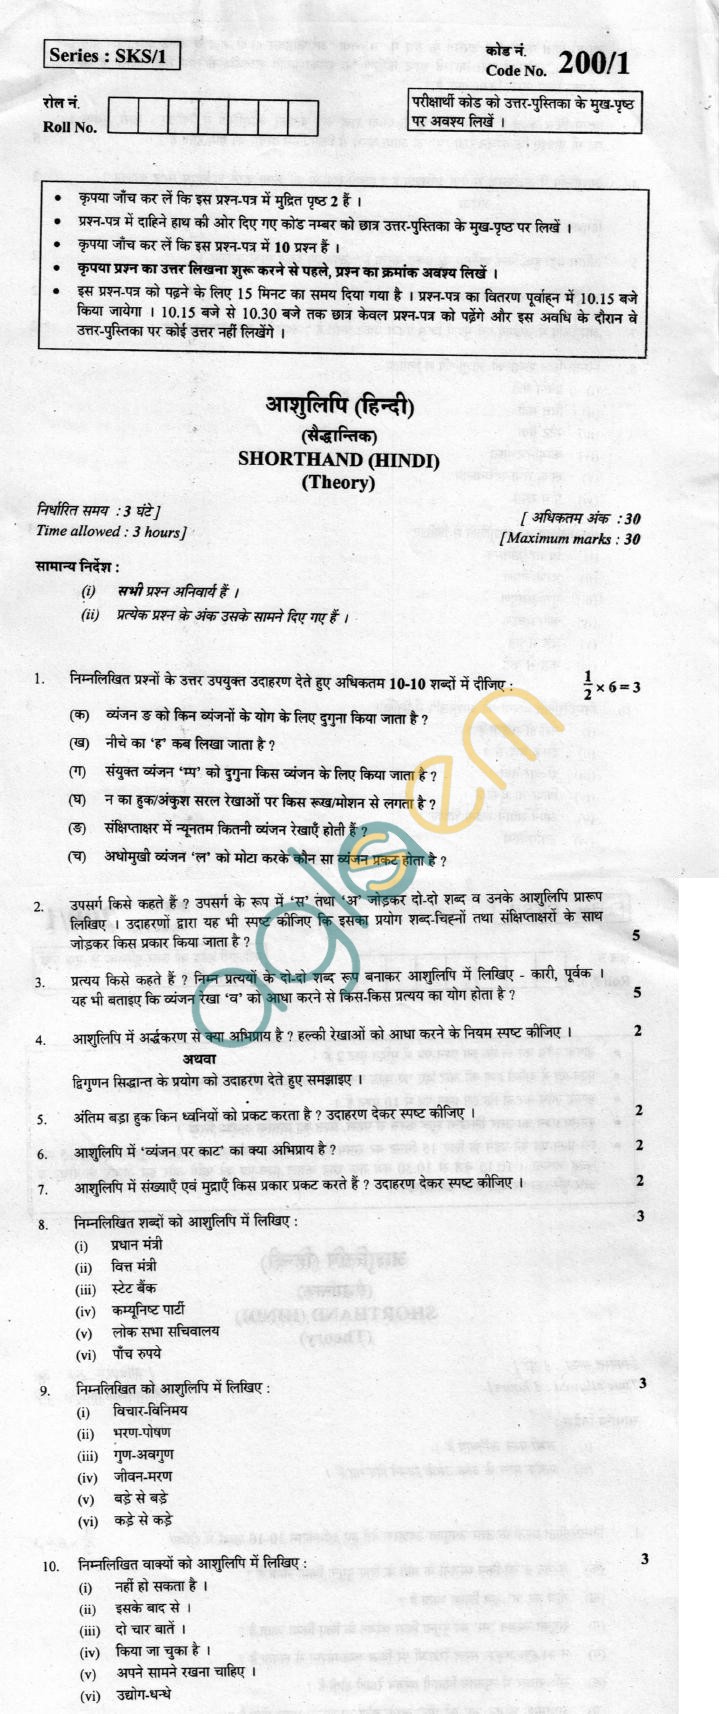 CBSE Board Exam 2013 Class XII Question Paper - Shorthand (Hindi)